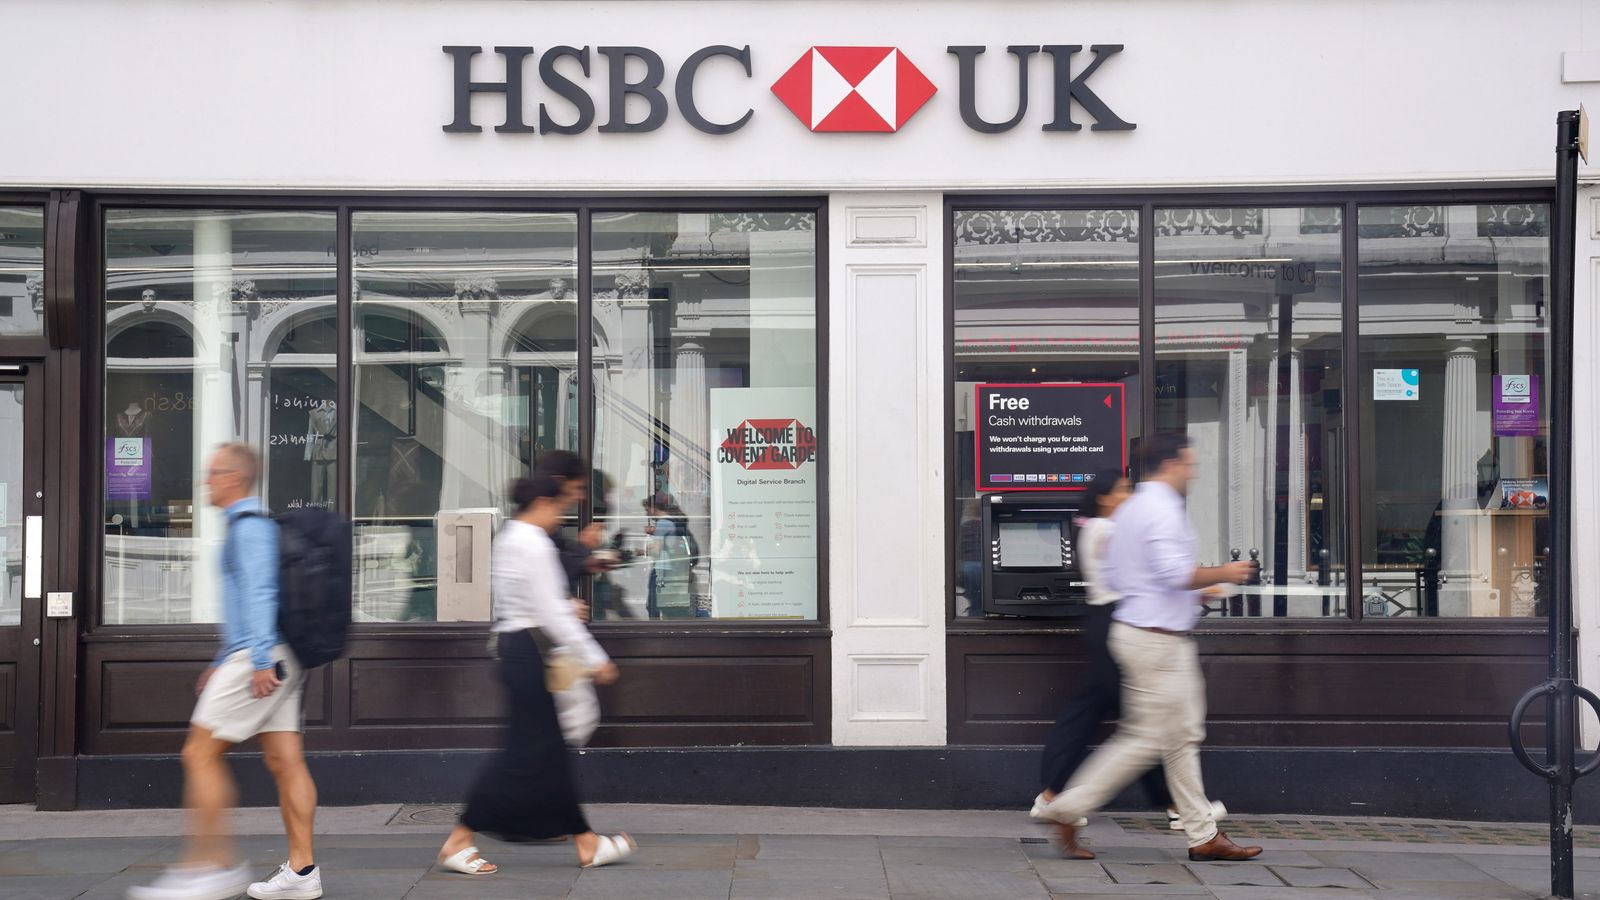 HSBC online and mobile banking services down on Black Friday